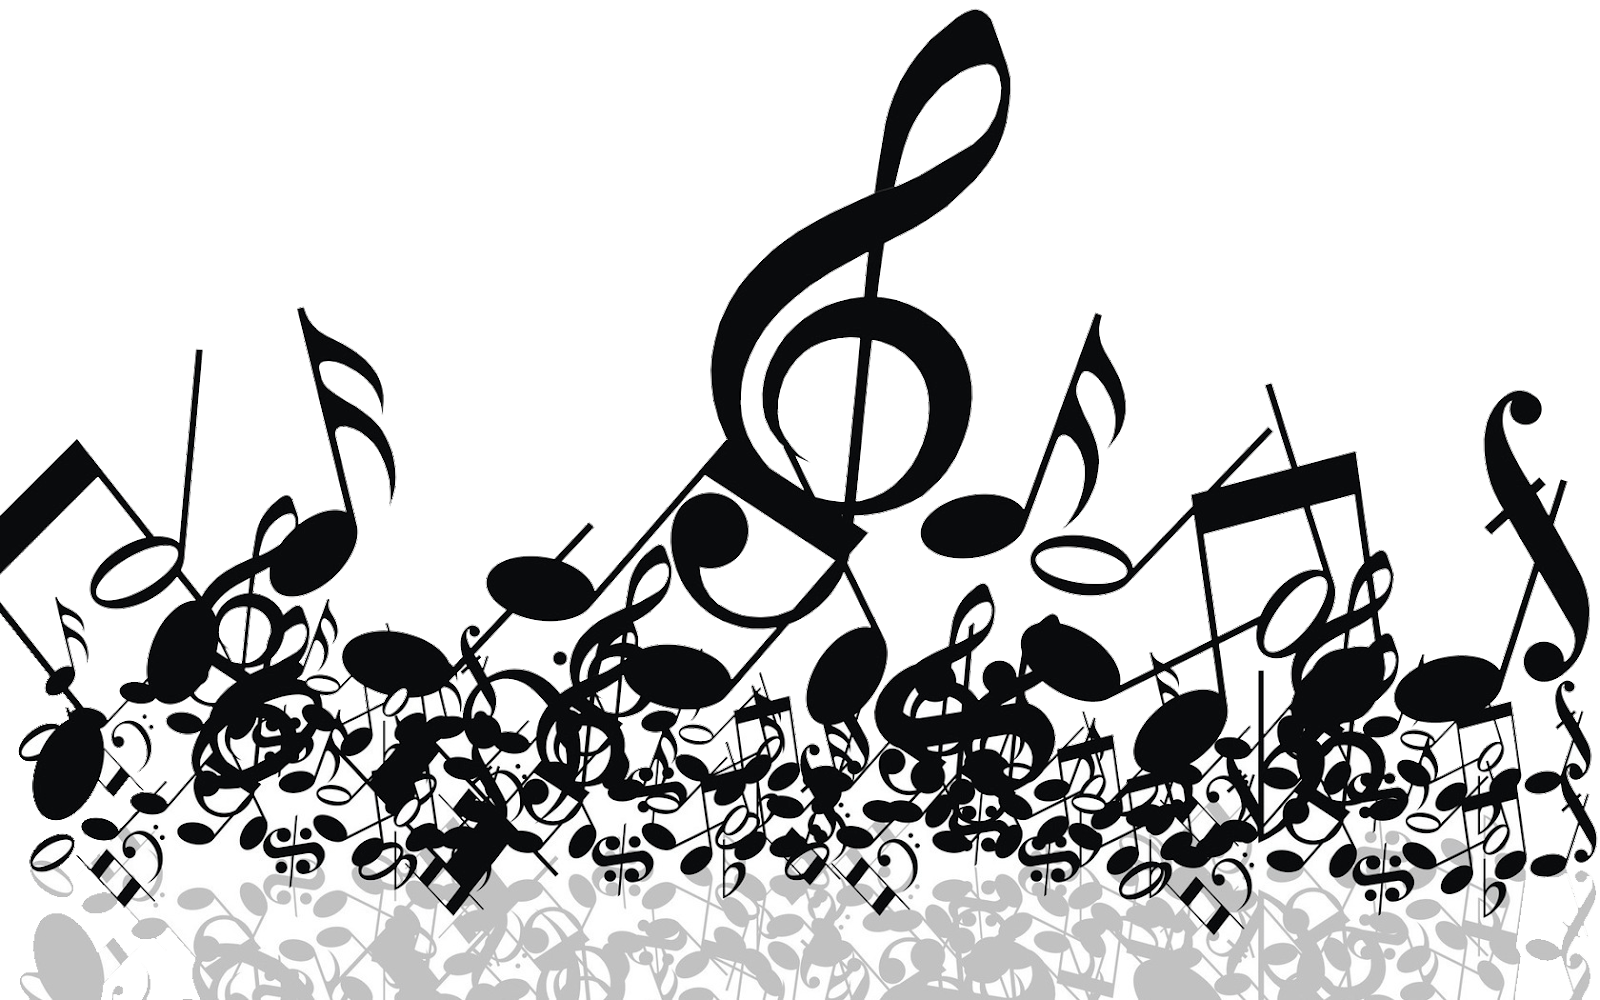 orchestra clipart music scales